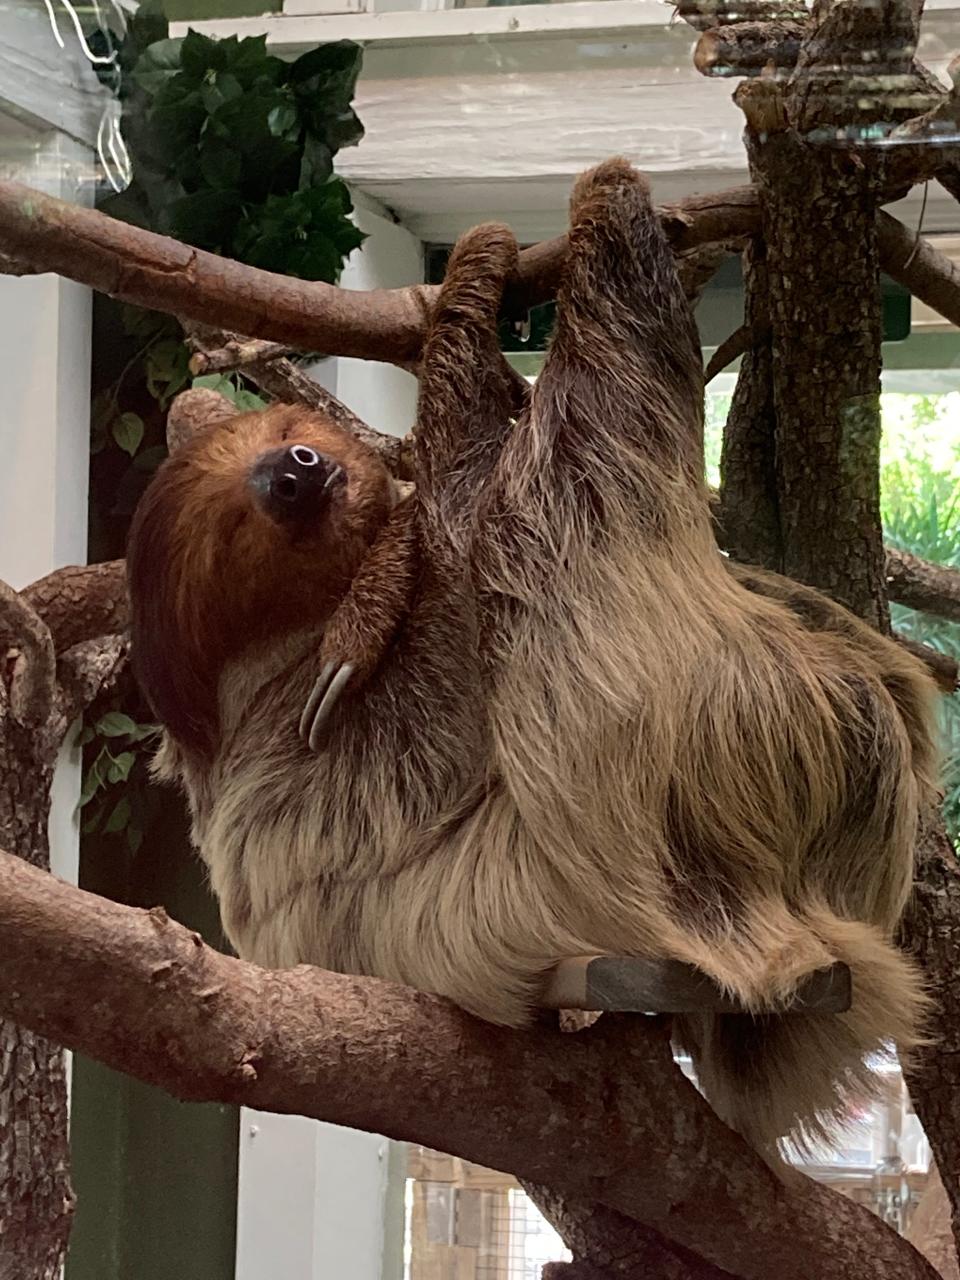 Visitors can see a wide range of animals, like this sloth, at Busch Gardens Tampa Bay, an Association of Zoos and Aquariums-accredited facility.